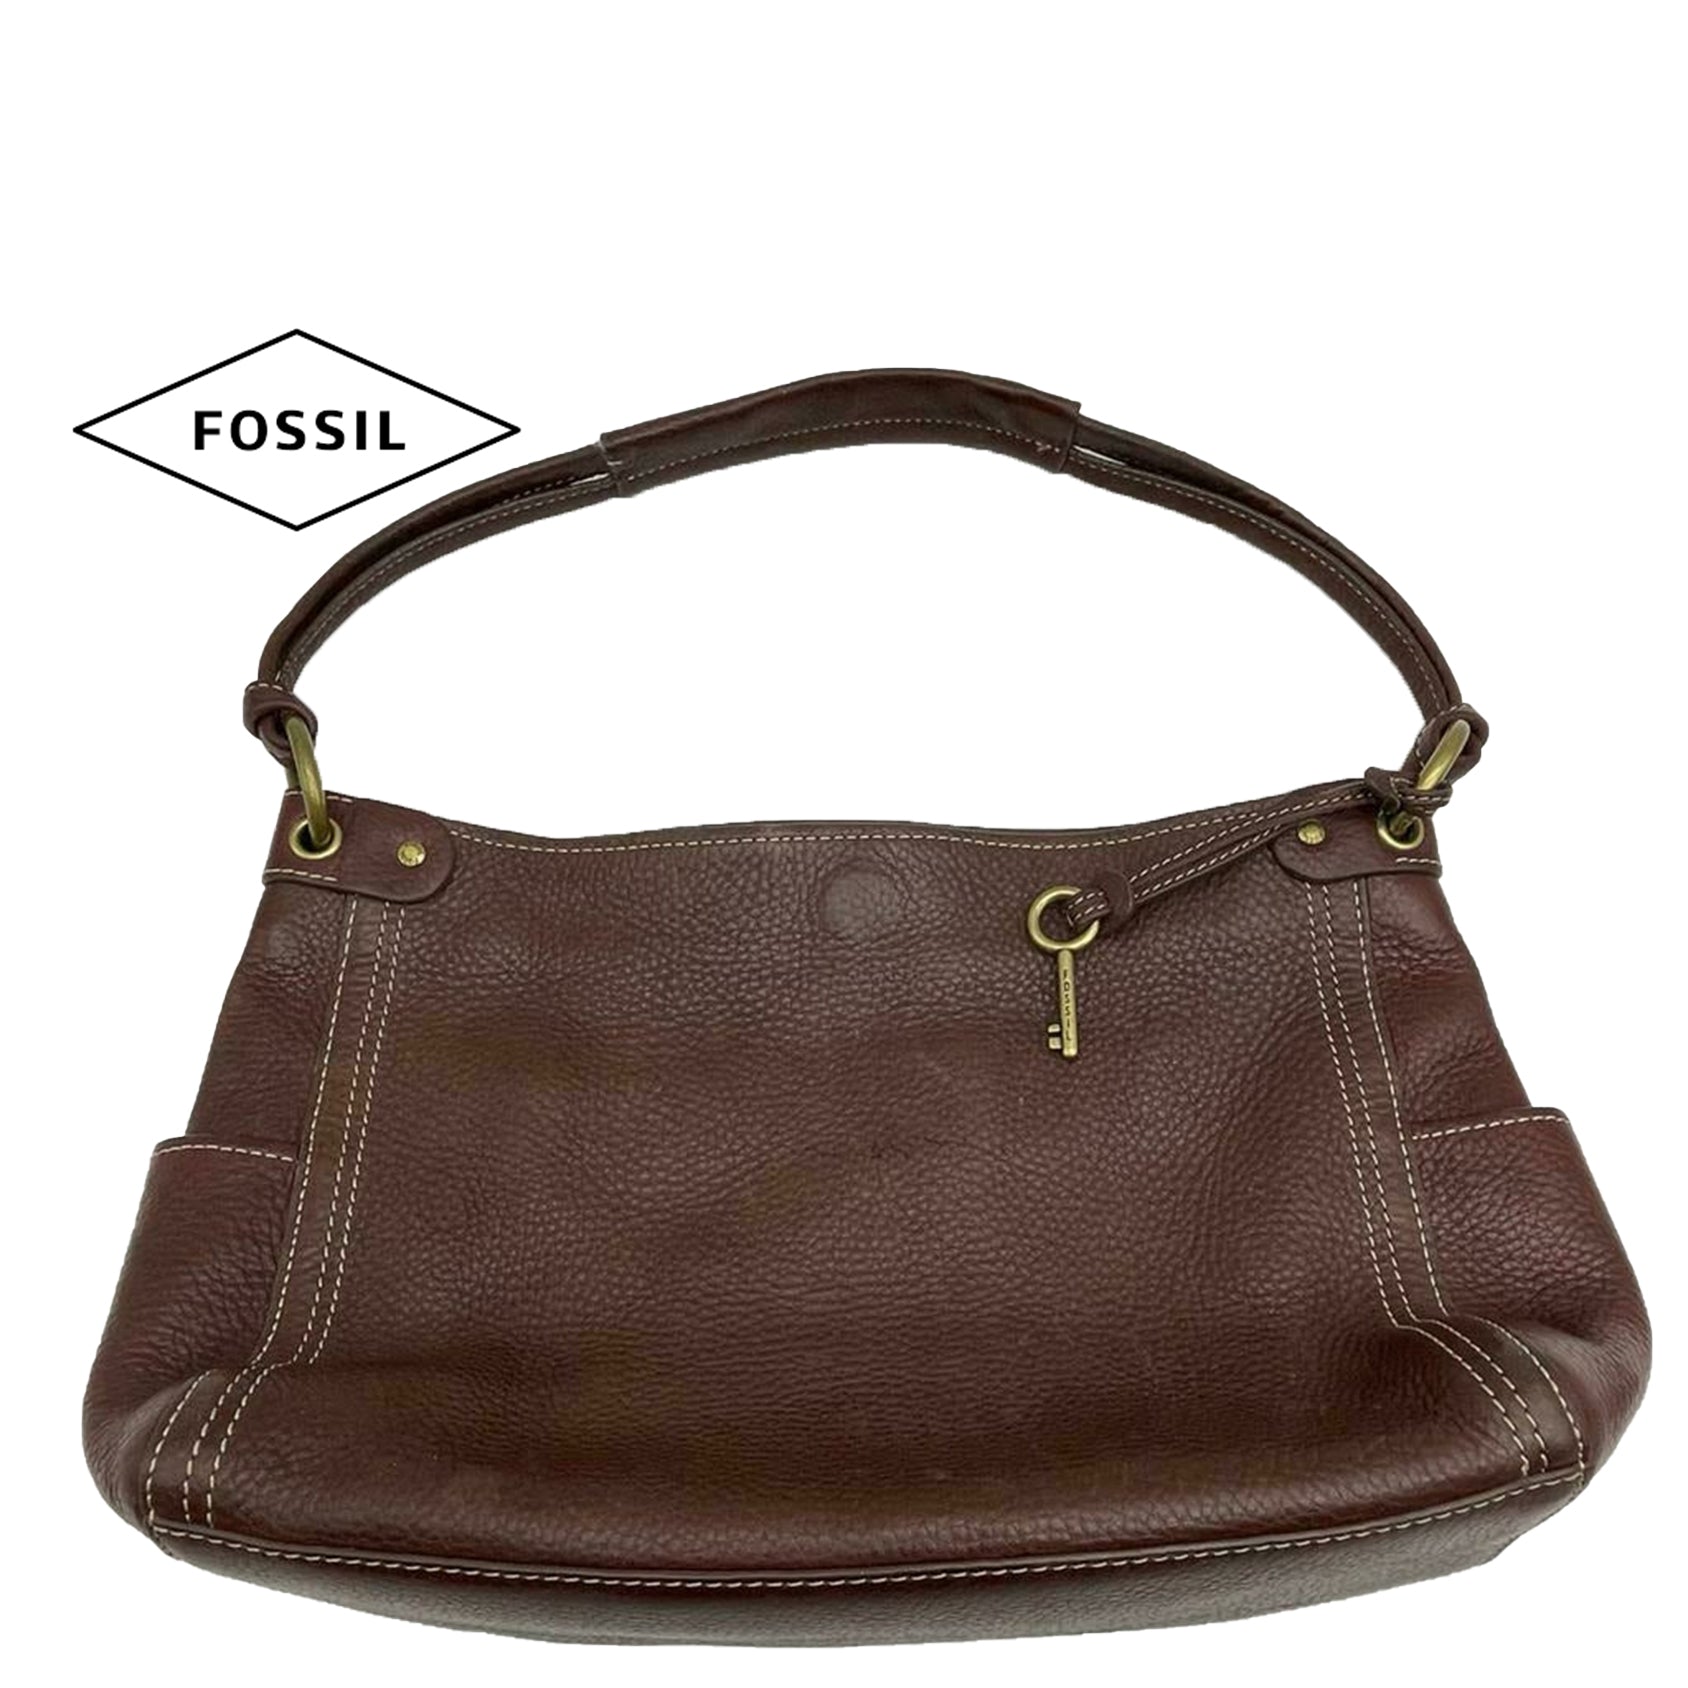 Fossil Maya Hobo Bag for $18 - strap not included : r/ThriftStoreHauls